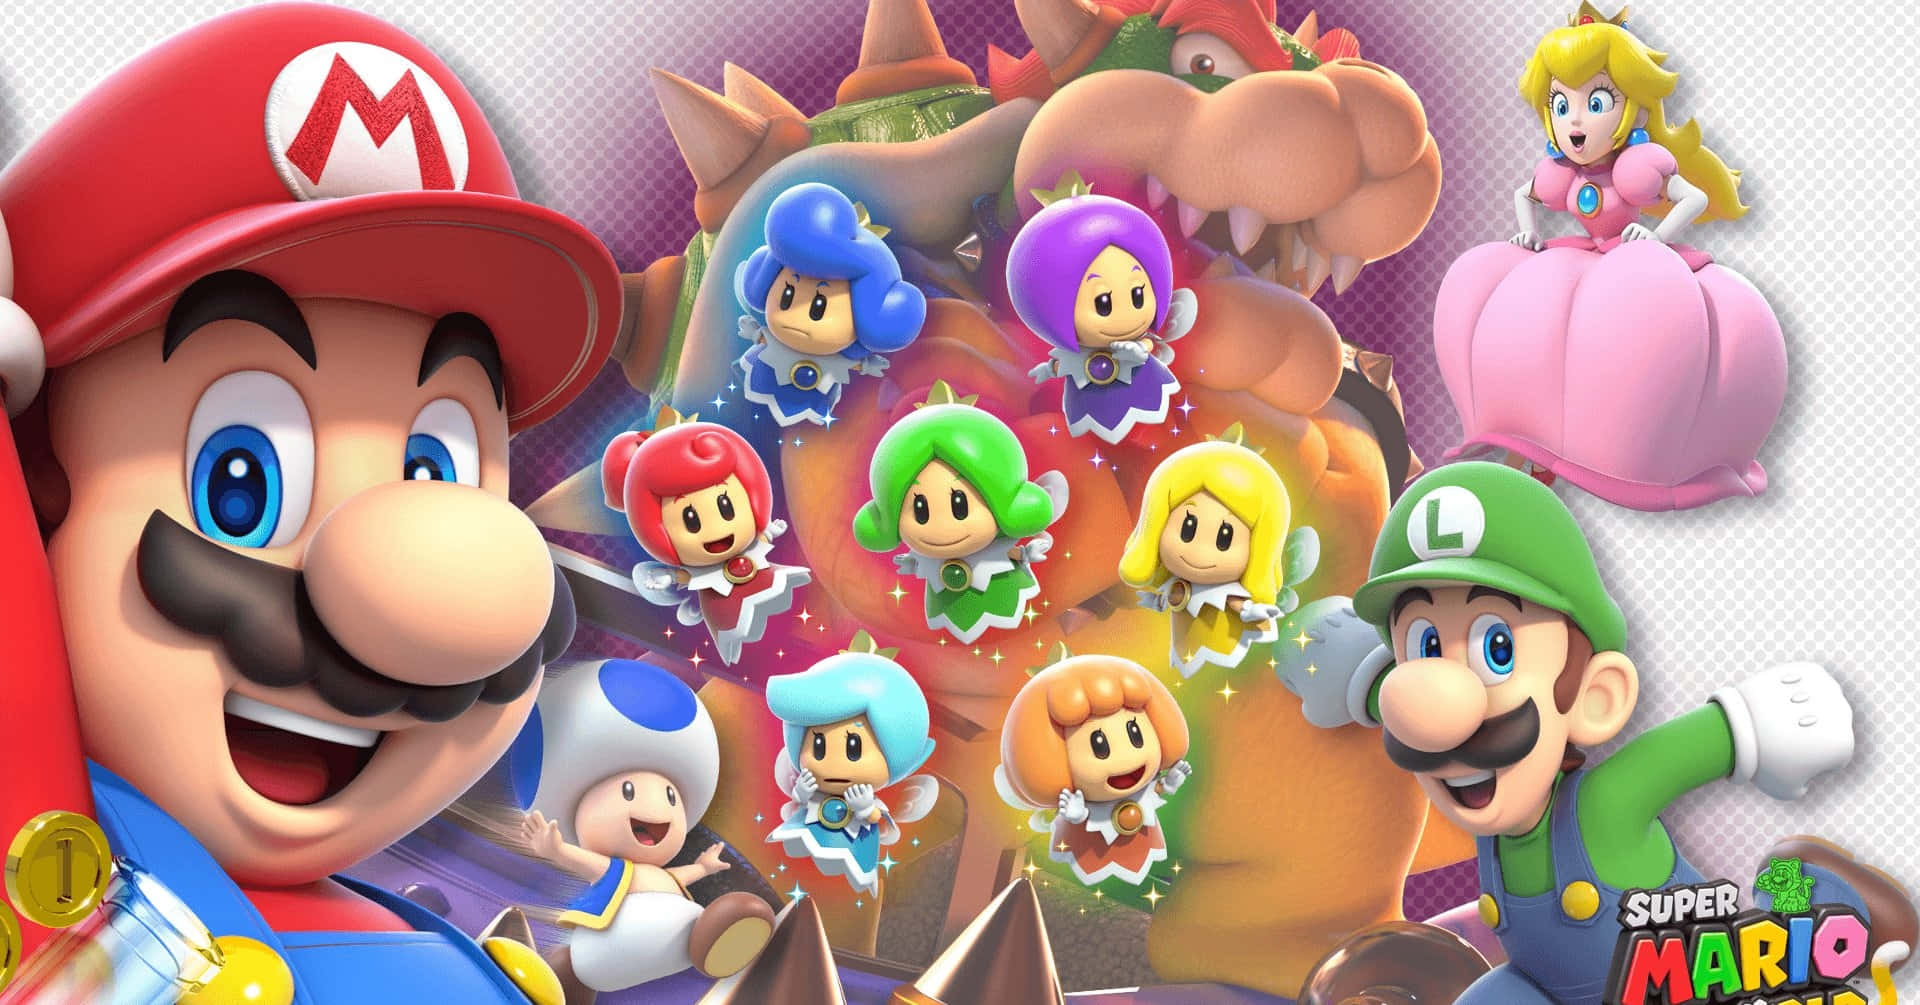 Group of Super Mario Characters on Adventure Wallpaper